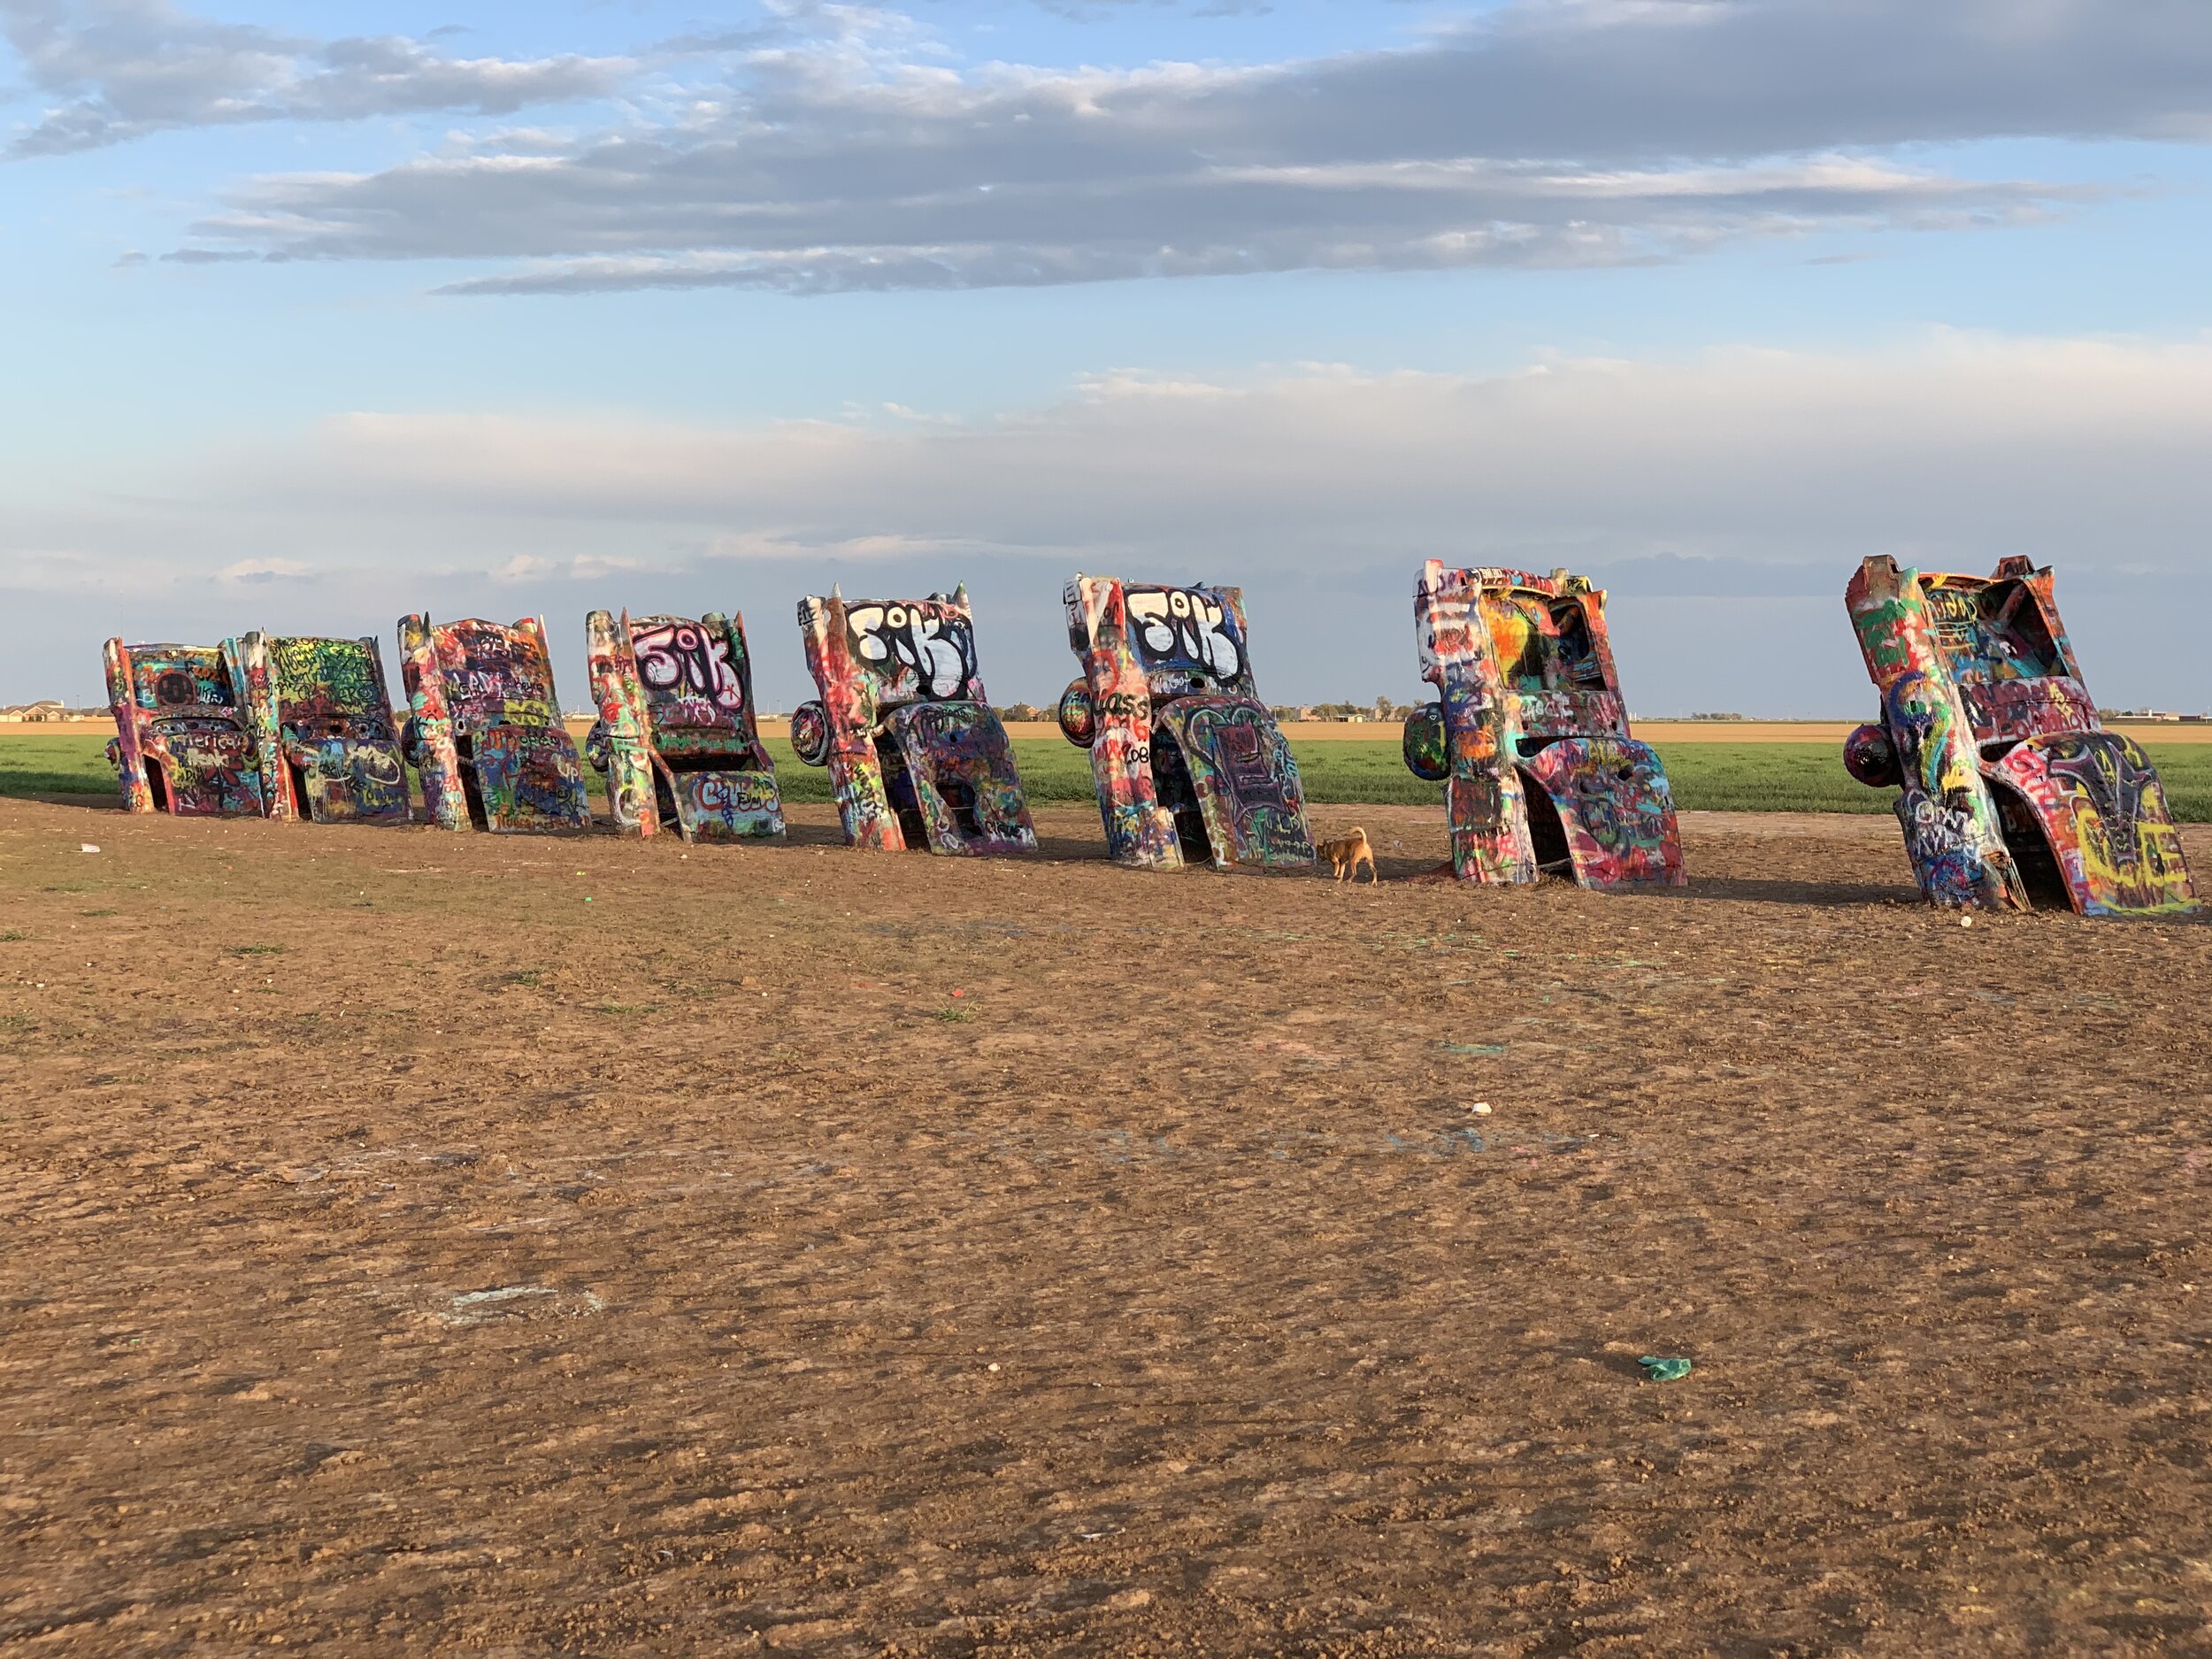  Cadillac Ranch along Route 66 west of Amarillo, Texas. This roadside art was the idea of an Amarillo billionaire and a group of hippies in the 1970s. These cars were driven, in working order to this site and then buried nose down in the dirt. Visito